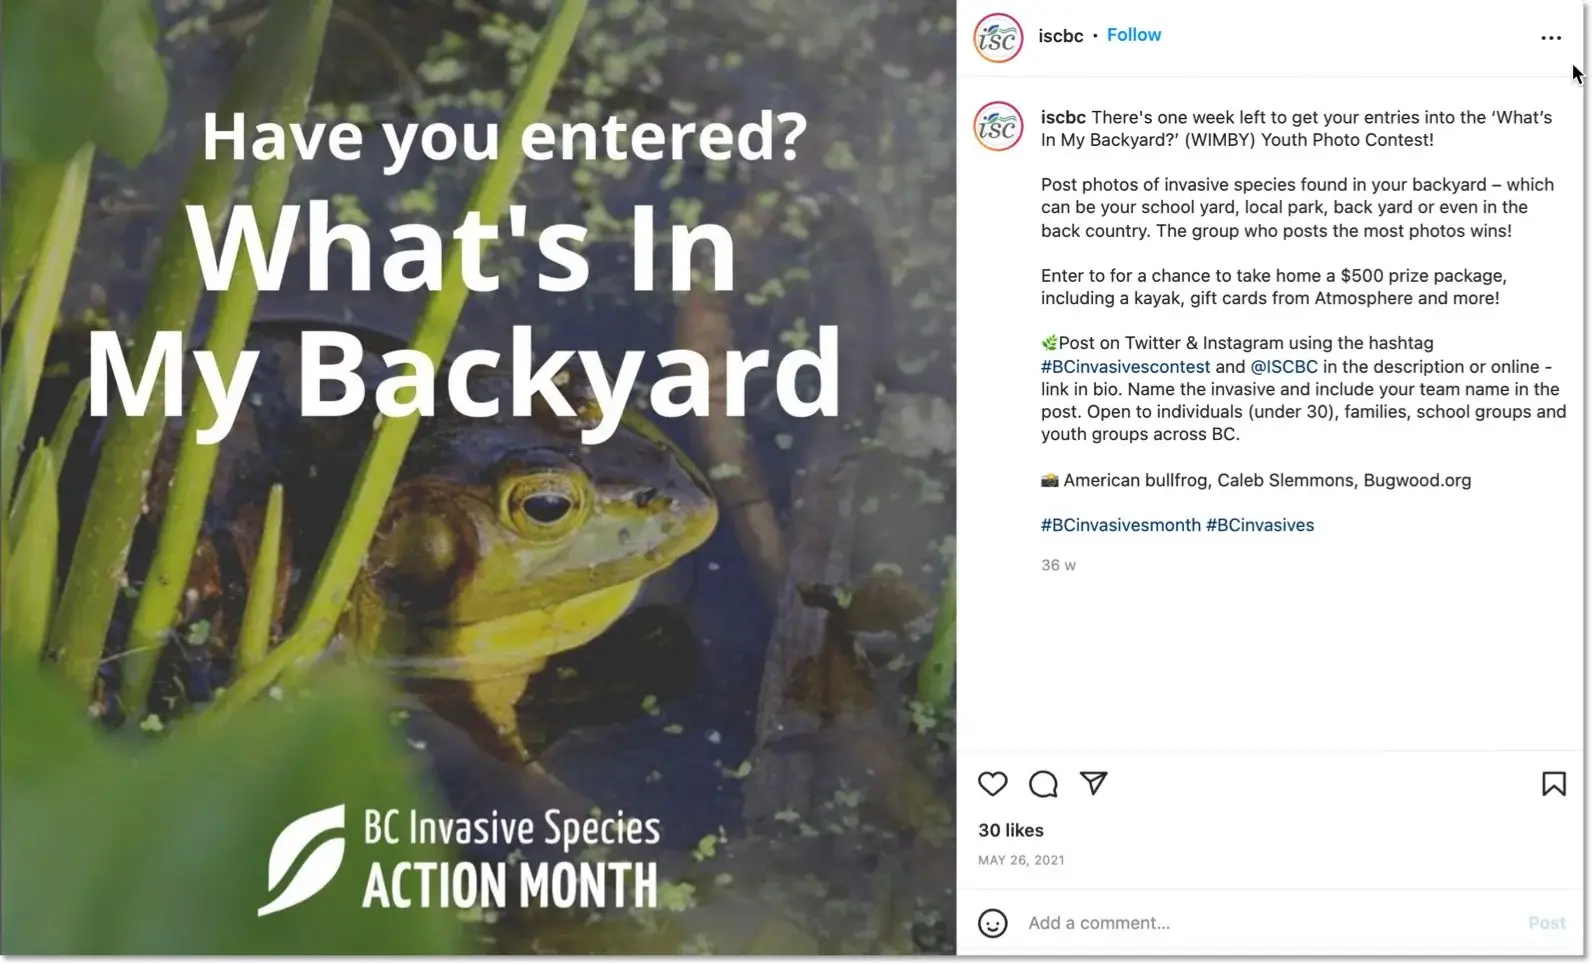 whats in my backyard mention and hashtag contest